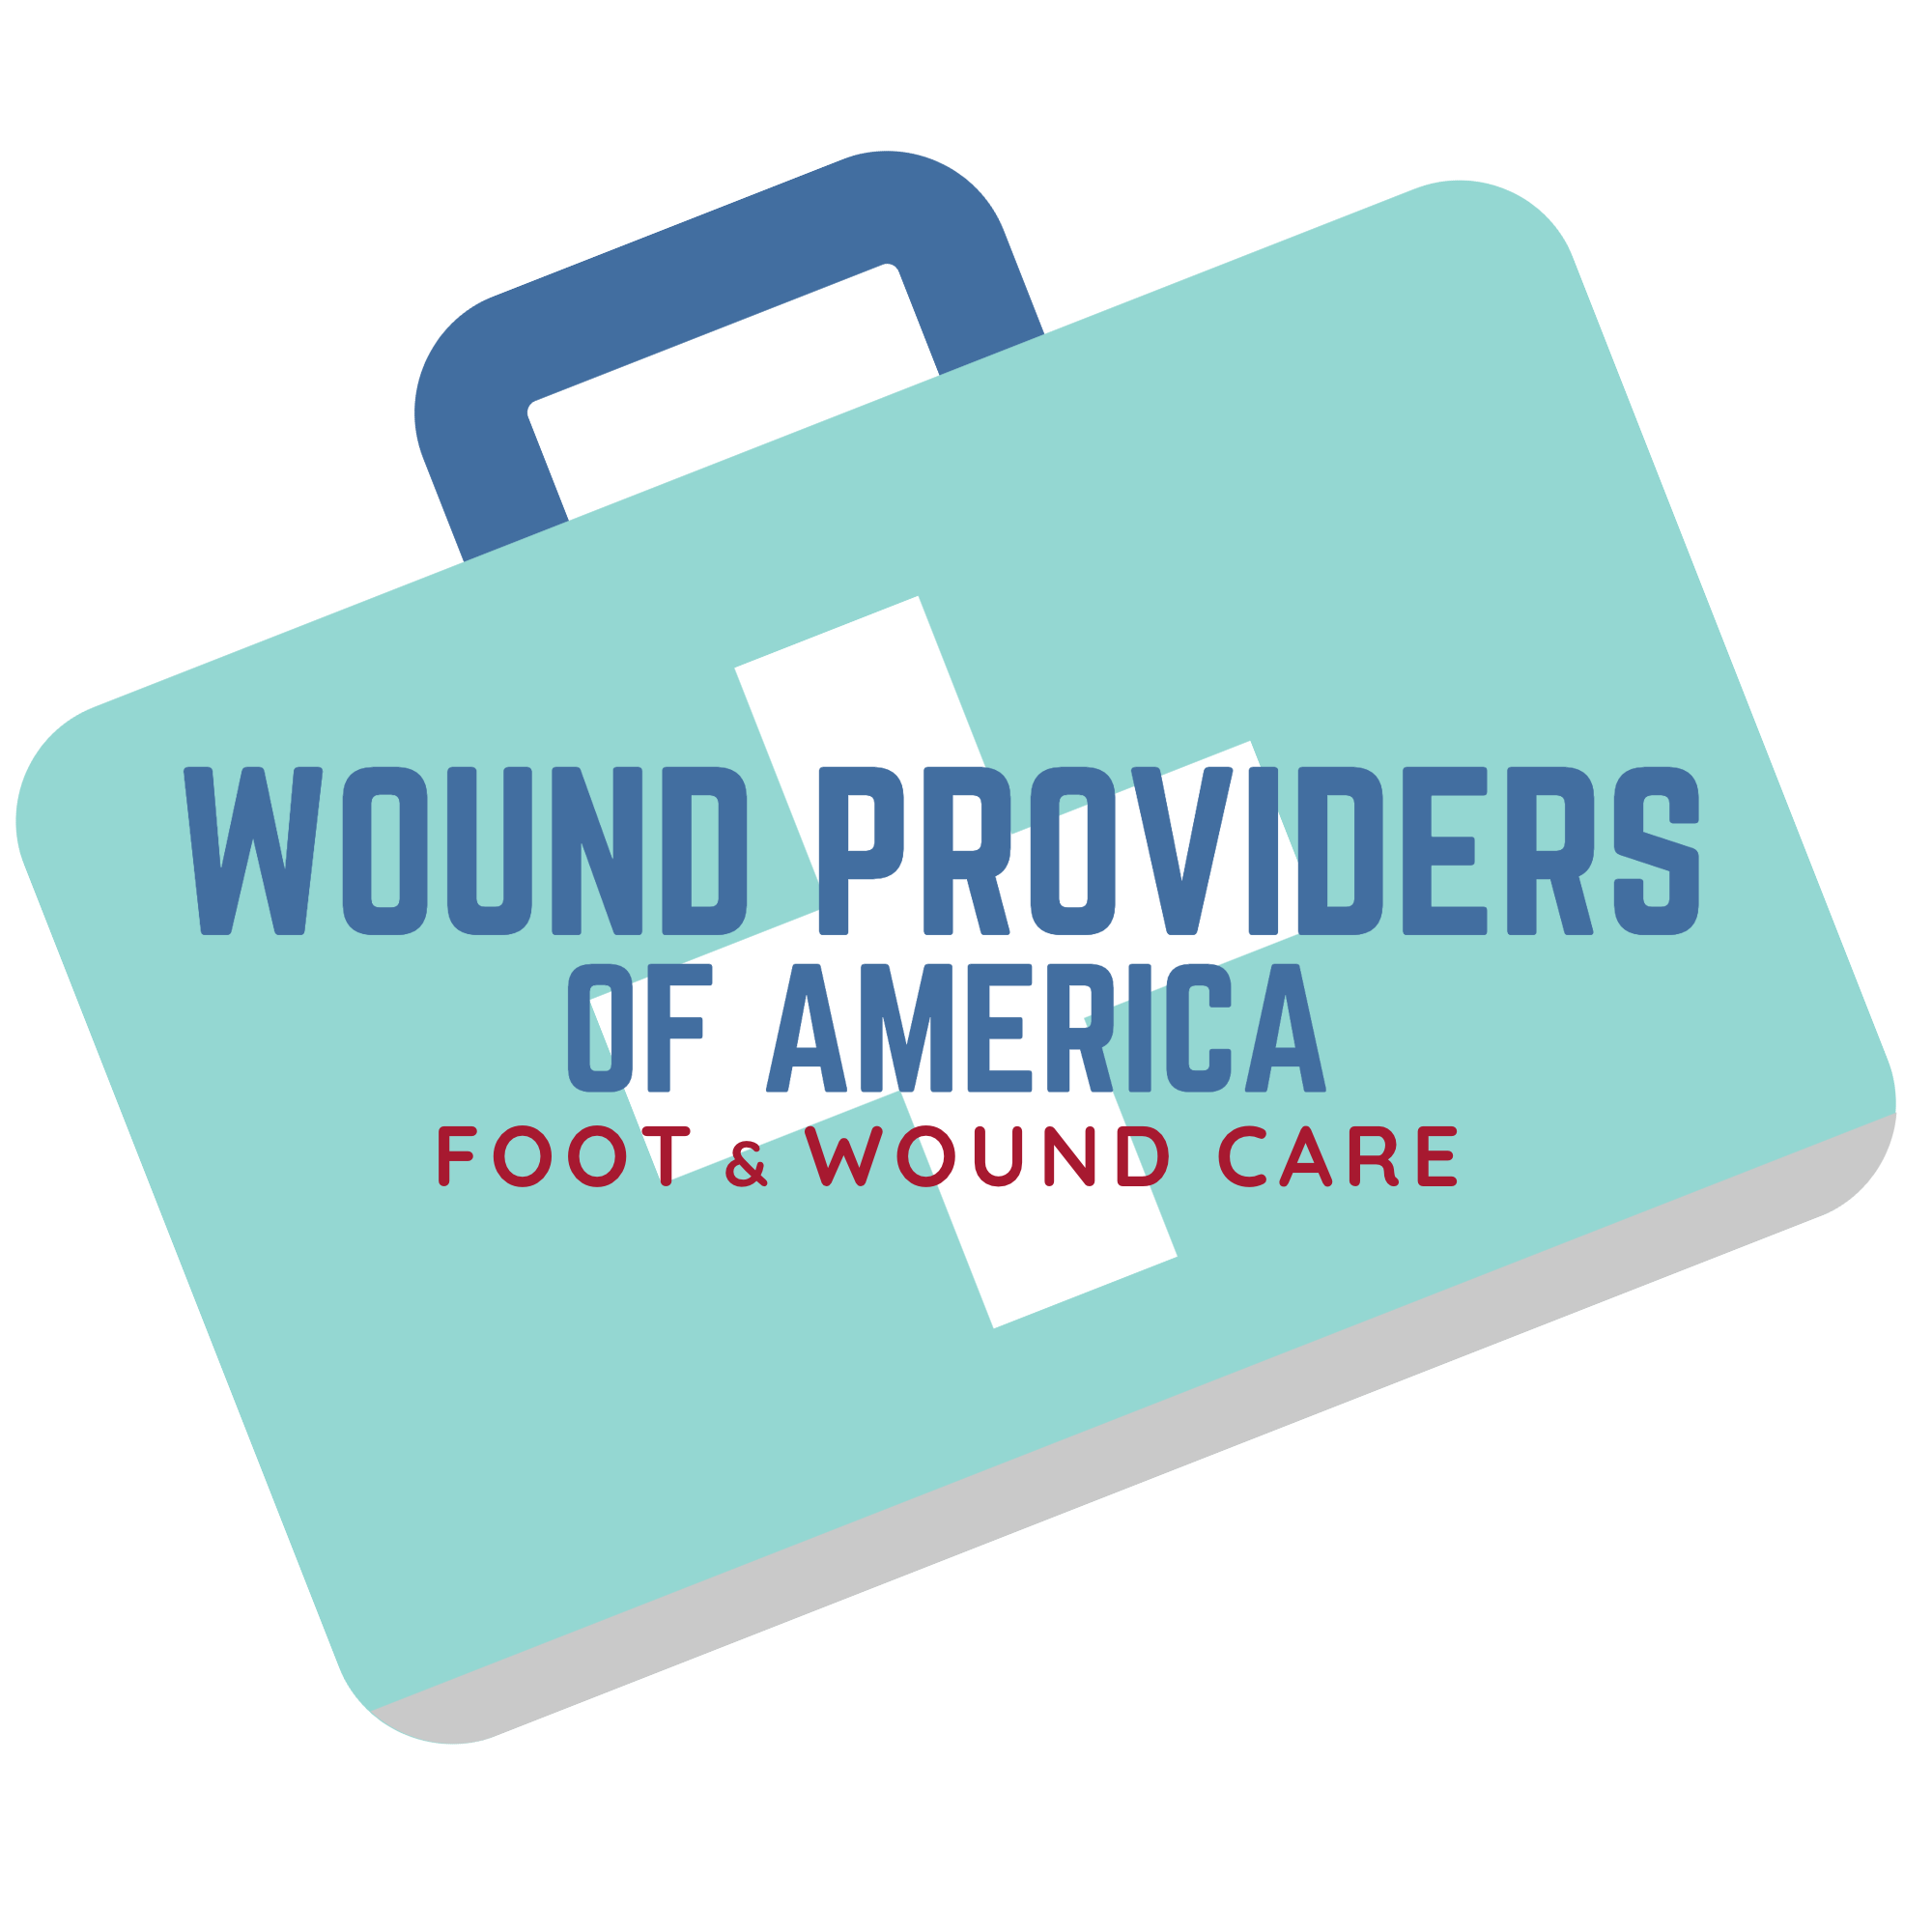 Wound Providers of America